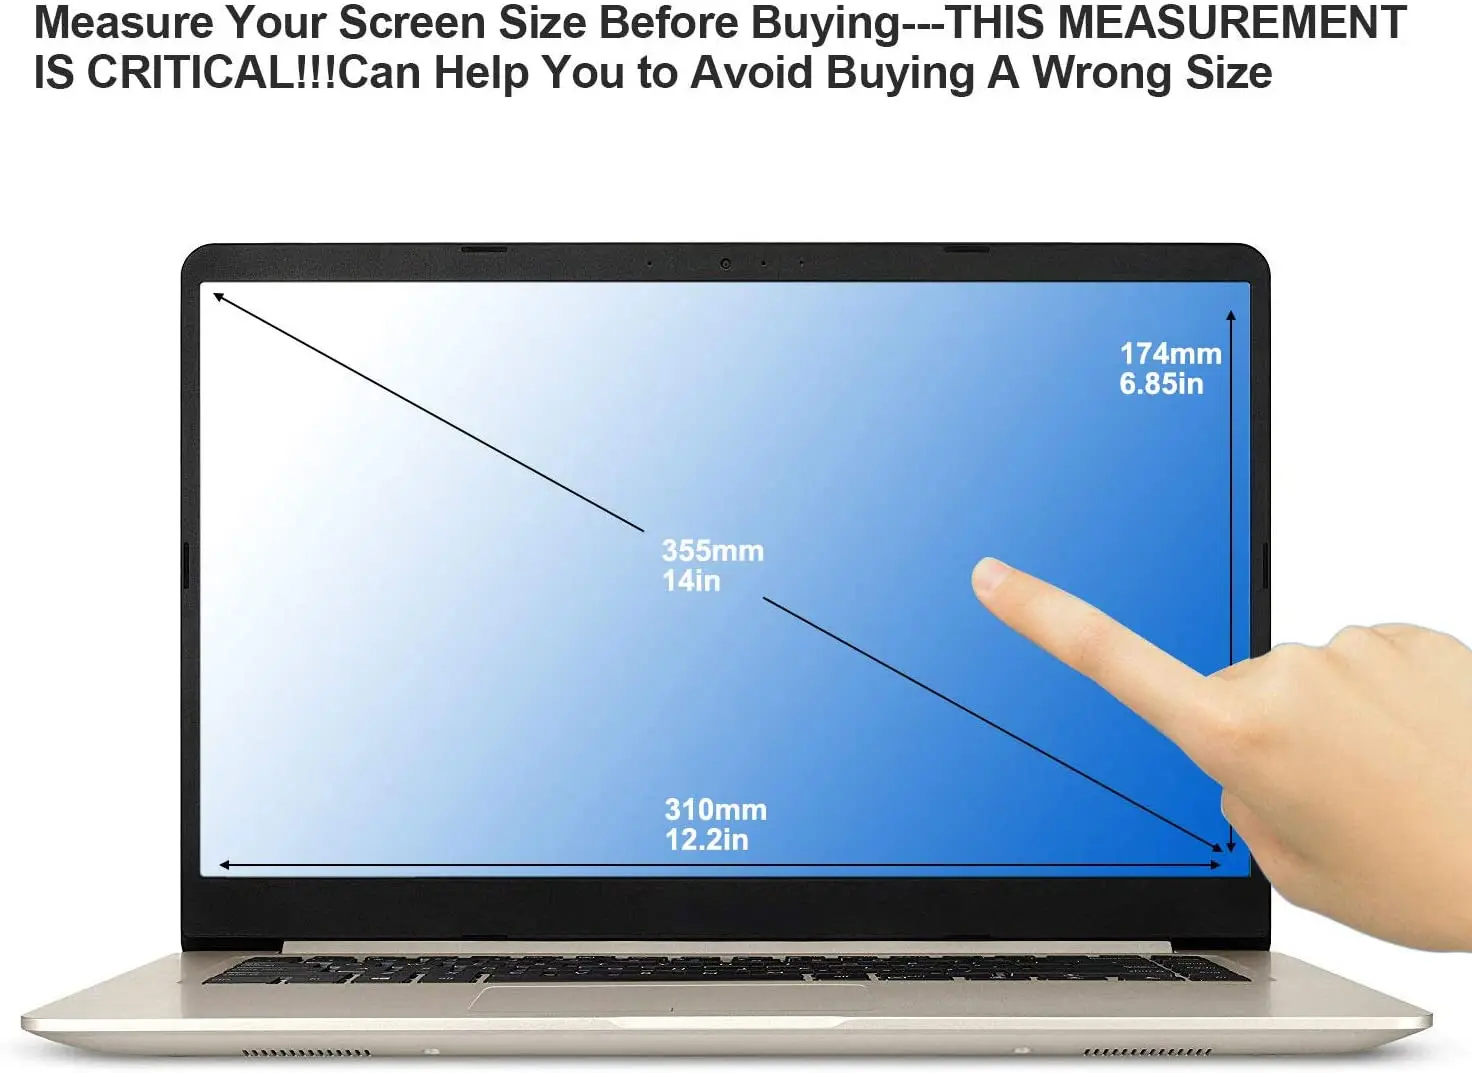 2x ultra clear anti glare anti blue ray screen protector guard cover for 14 asus zenbook duo ux481 nanoedge screen laptop free global shipping